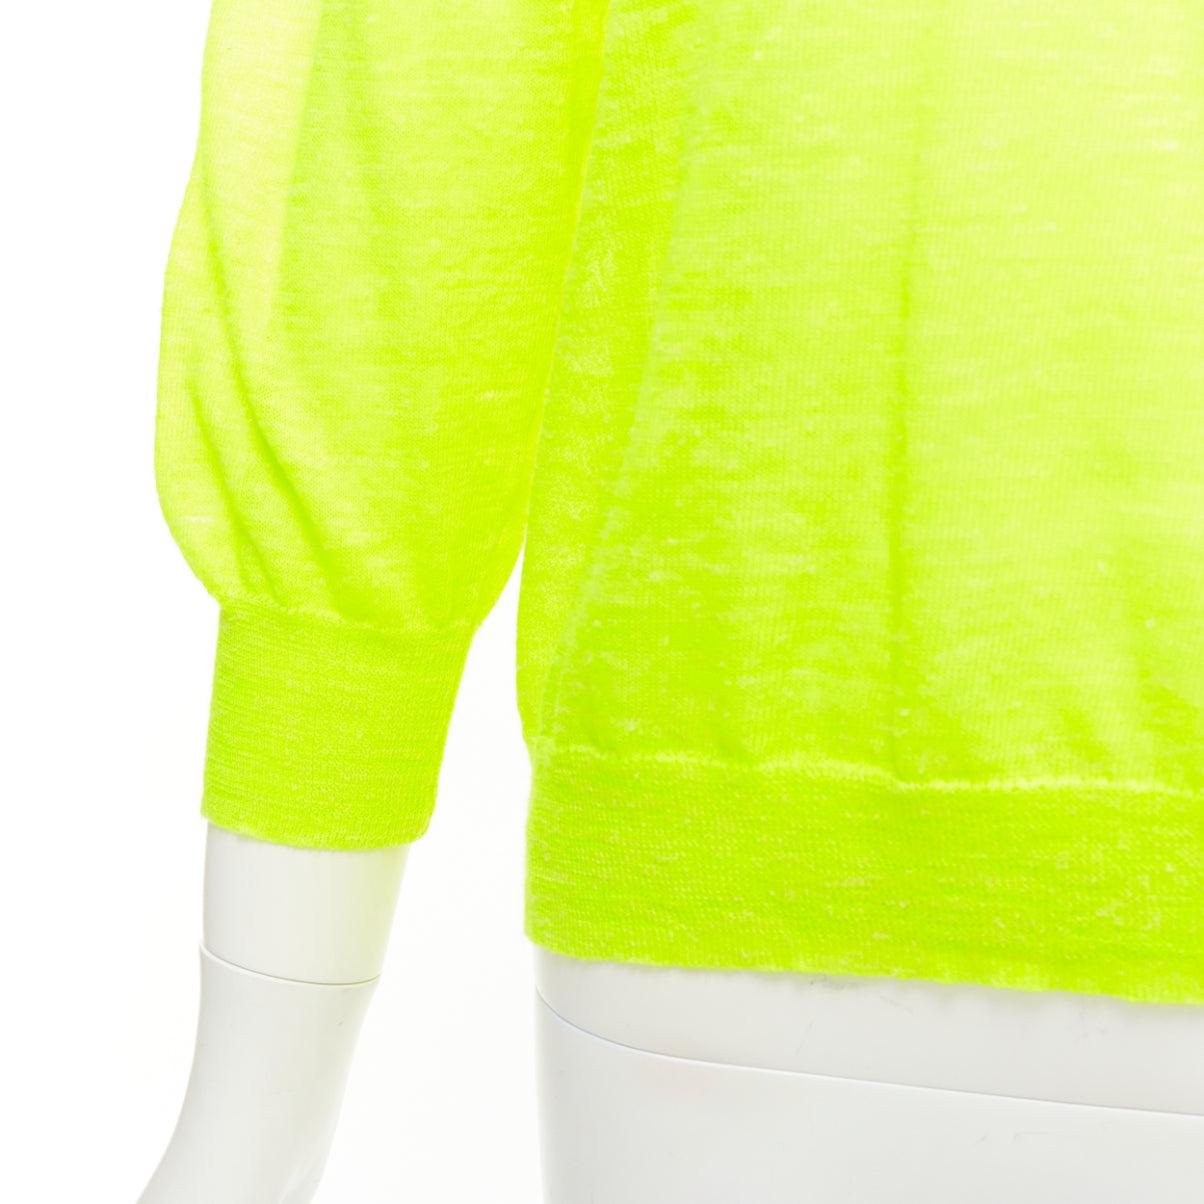 J.CREW neon yellow V neck 3/4 sleeves sweater pullover S
Reference: NKLL/A00157
Brand: J.CREW
Material: Feels like cotton
Color: Neon Yellow
Pattern: Solid
Closure: Pullover
Made in: China

CONDITION:
Condition: Excellent, this item was pre-owned